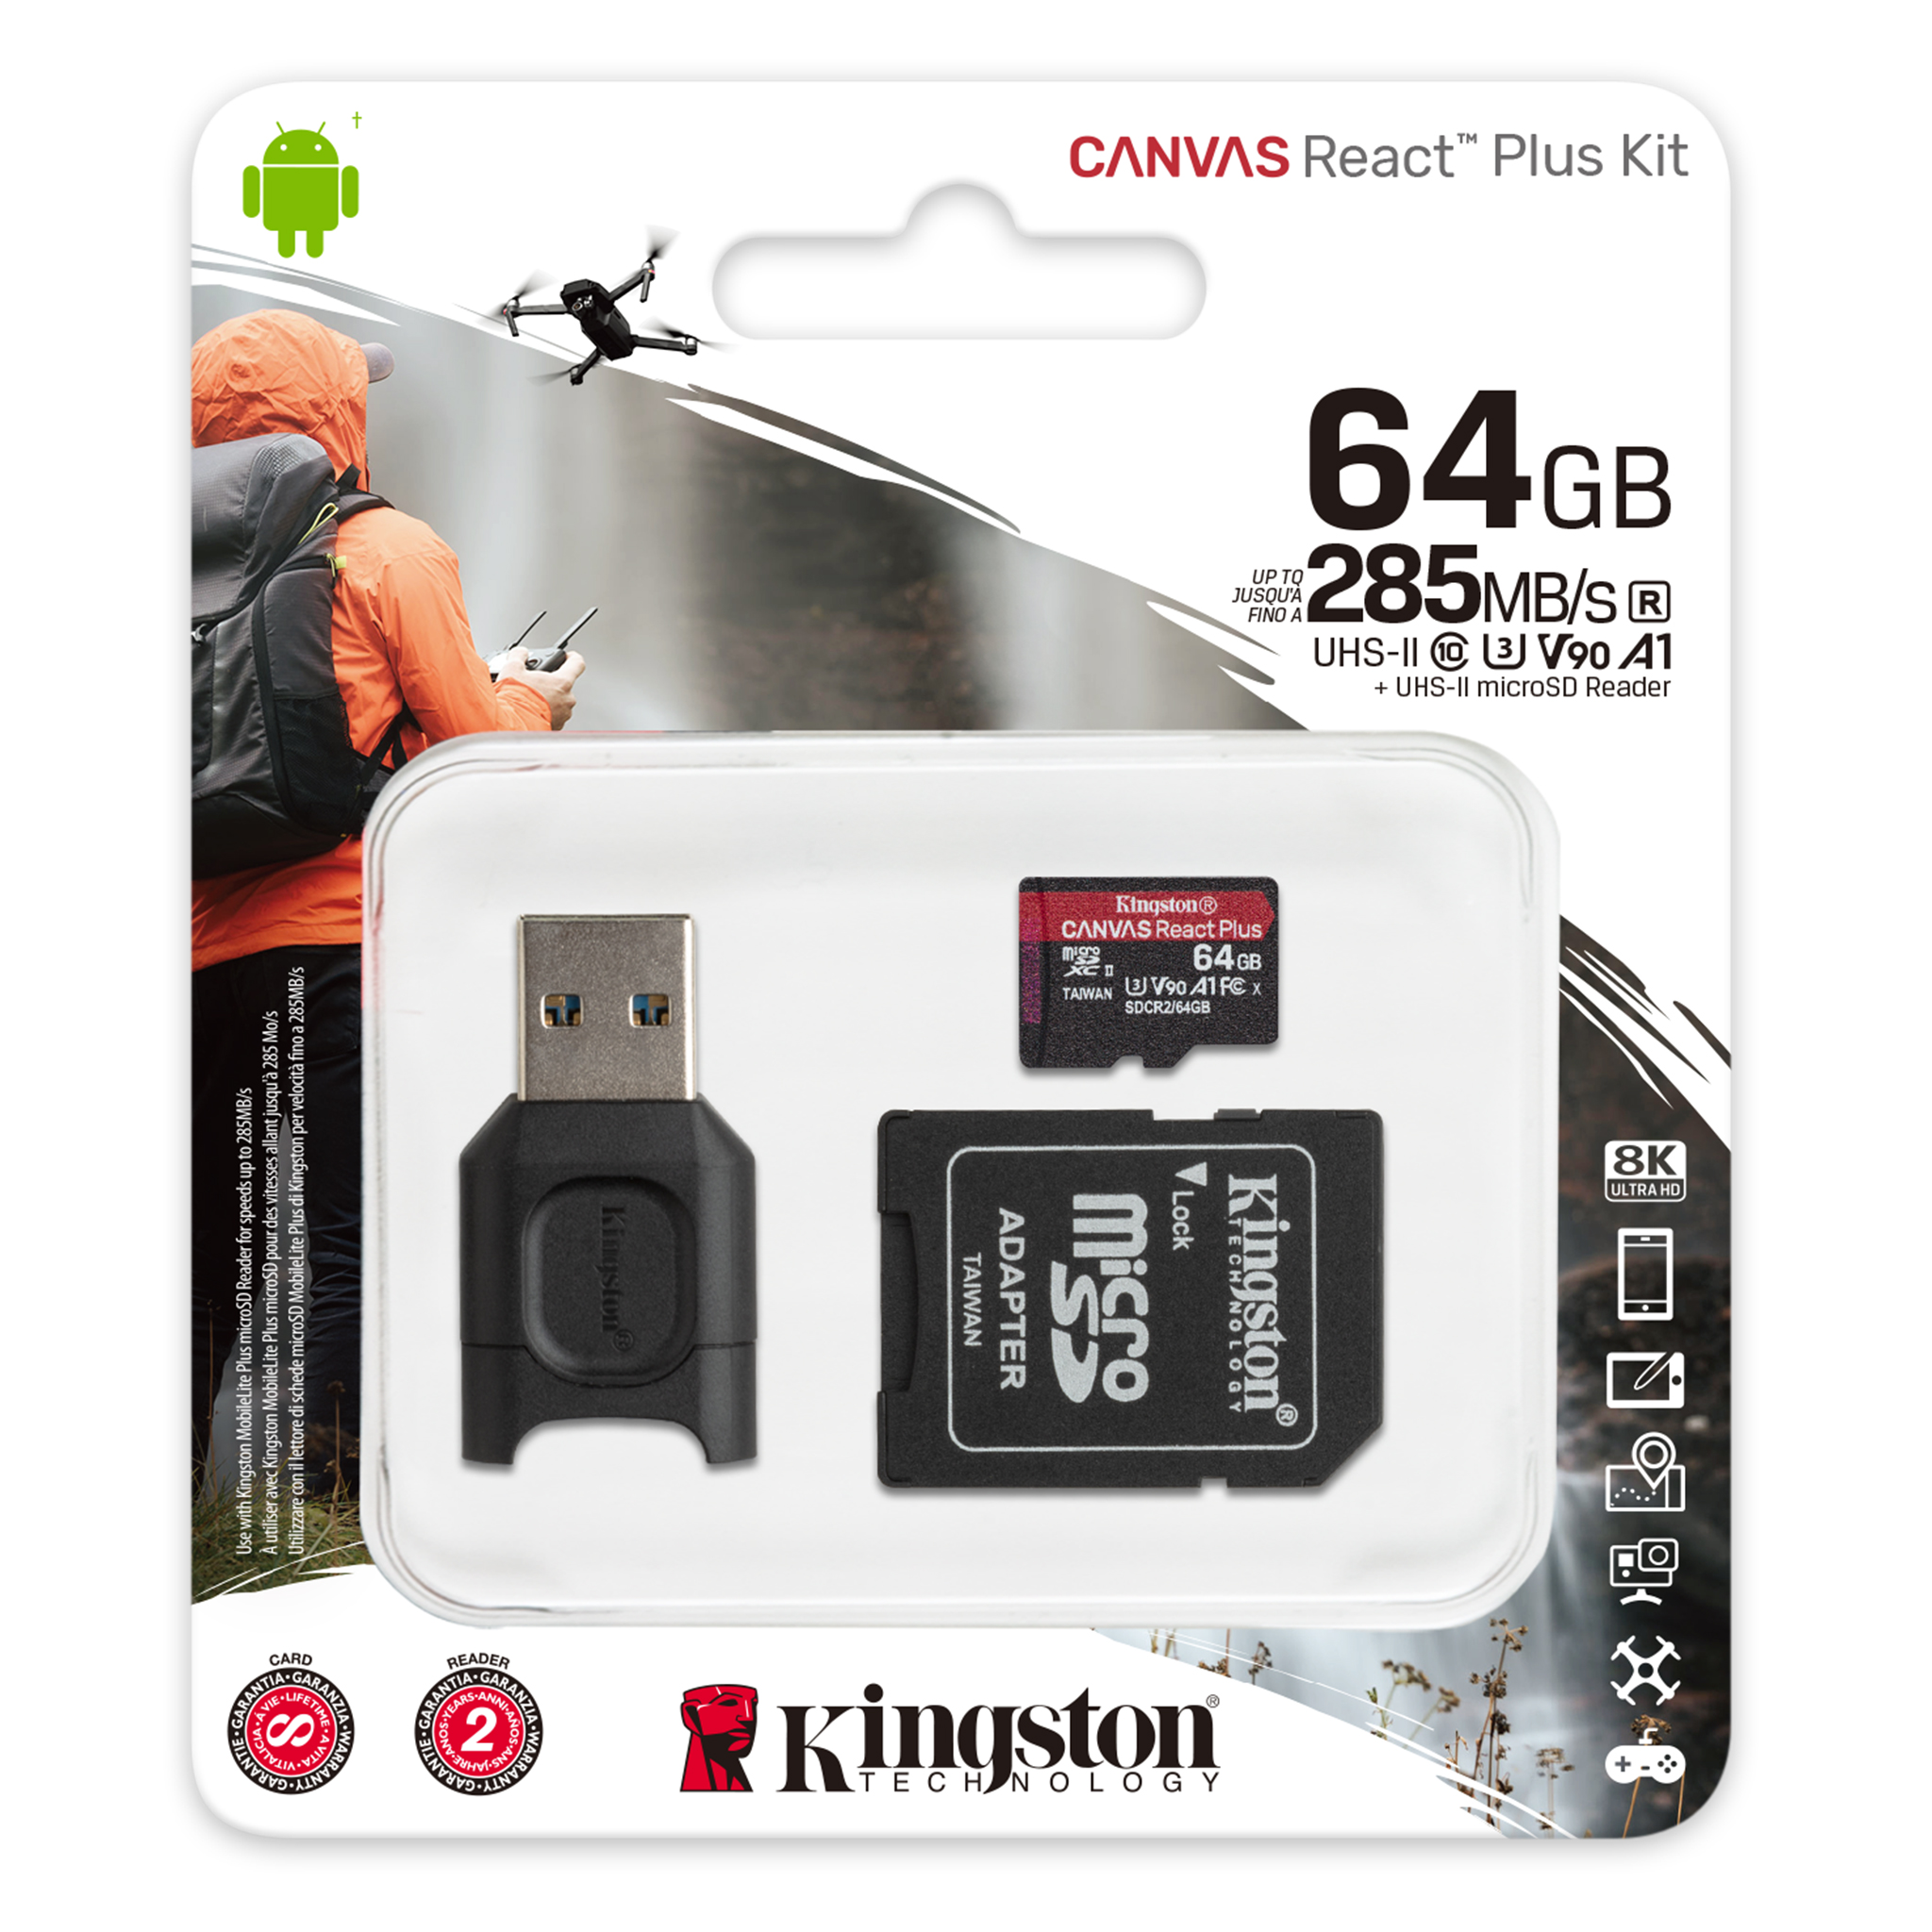 SanFlash Kingston 64GB React MicroSDXC for LG D684 with SD Adapter 100MBs Works with Kingston 